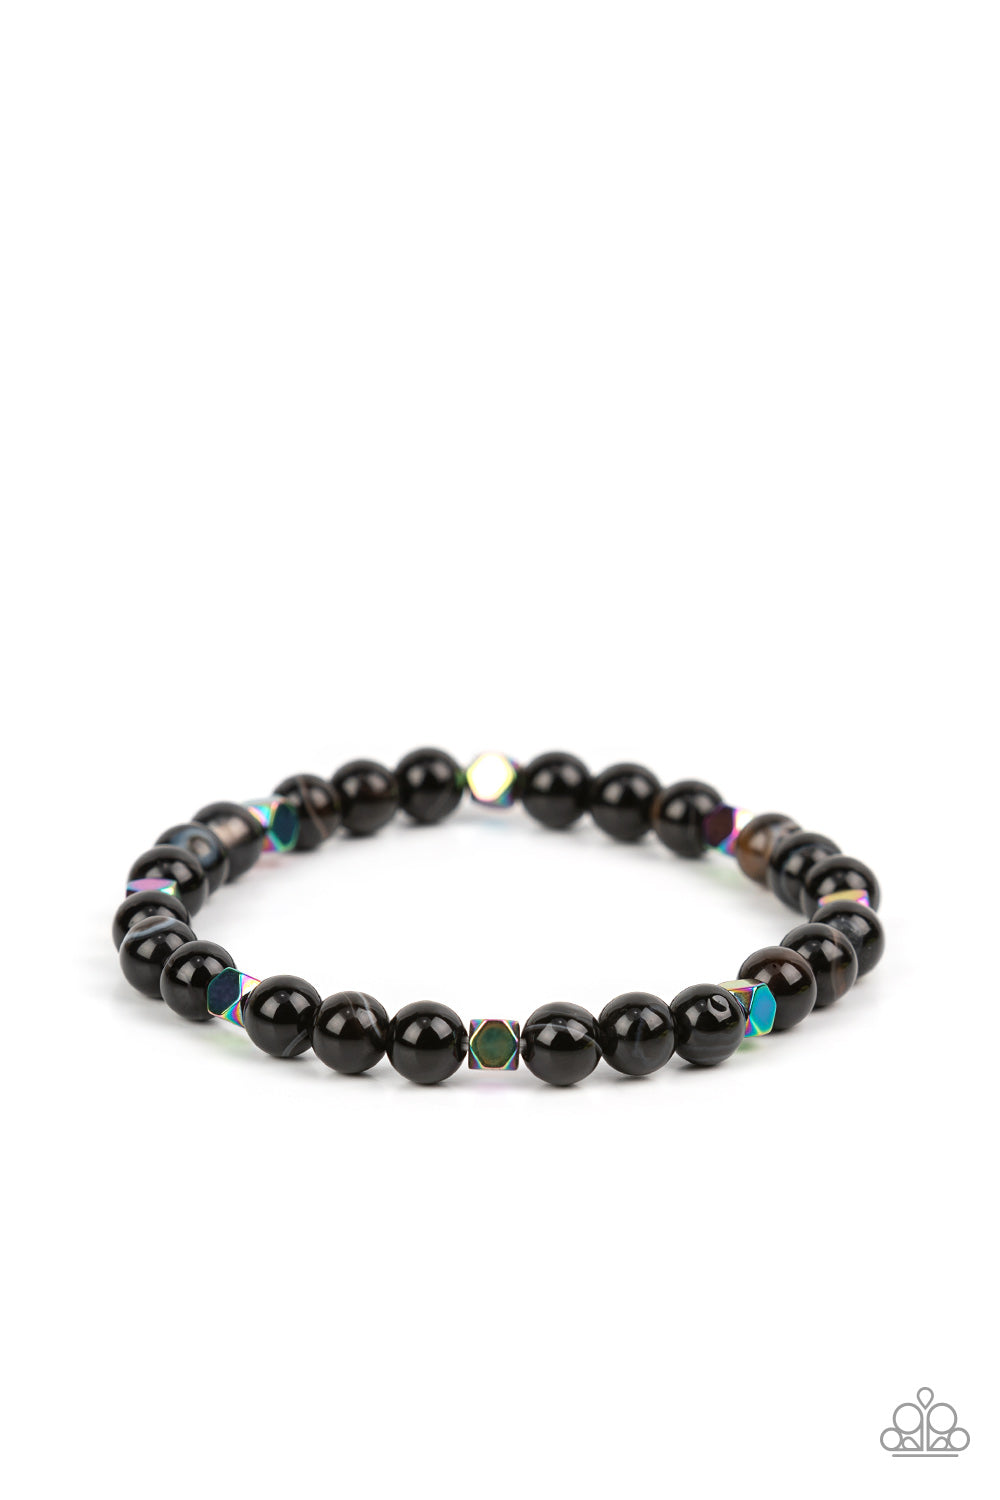 Interstellar Solitude - Black Stone Oil Spill Bracelets - Paparazzi Accessories a dainty collection of natural-finished black stone beads and faceted metallic oil spill cube beads are threaded along a stretchy band around the wrist for an earthy flair.  Sold as one individual bracelet.